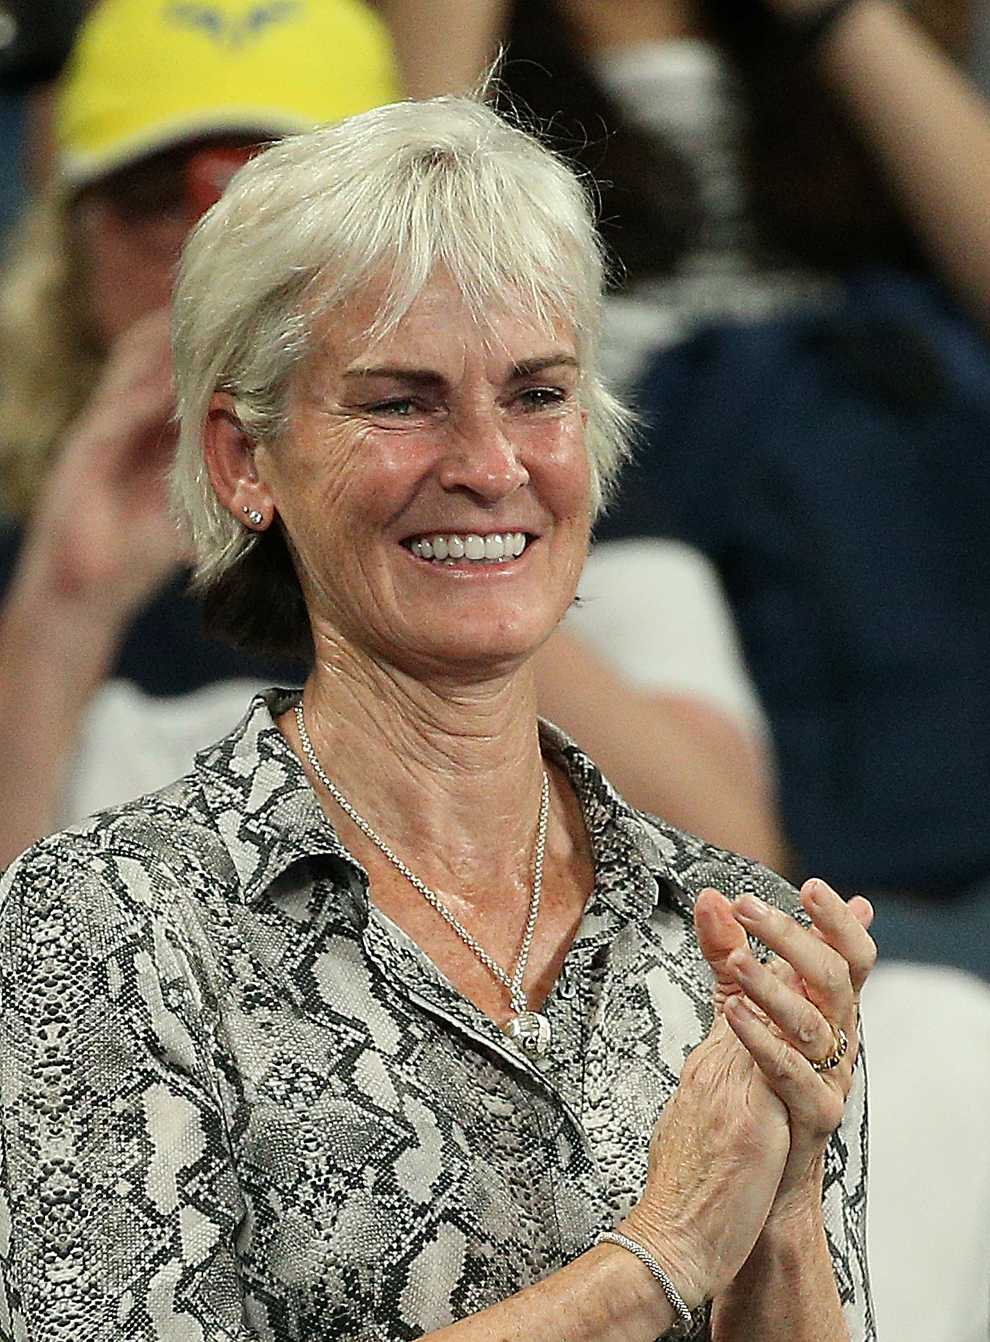 Tennis mother Judy Murray is used to serving, now she's testing herself on cooking (PA Images)